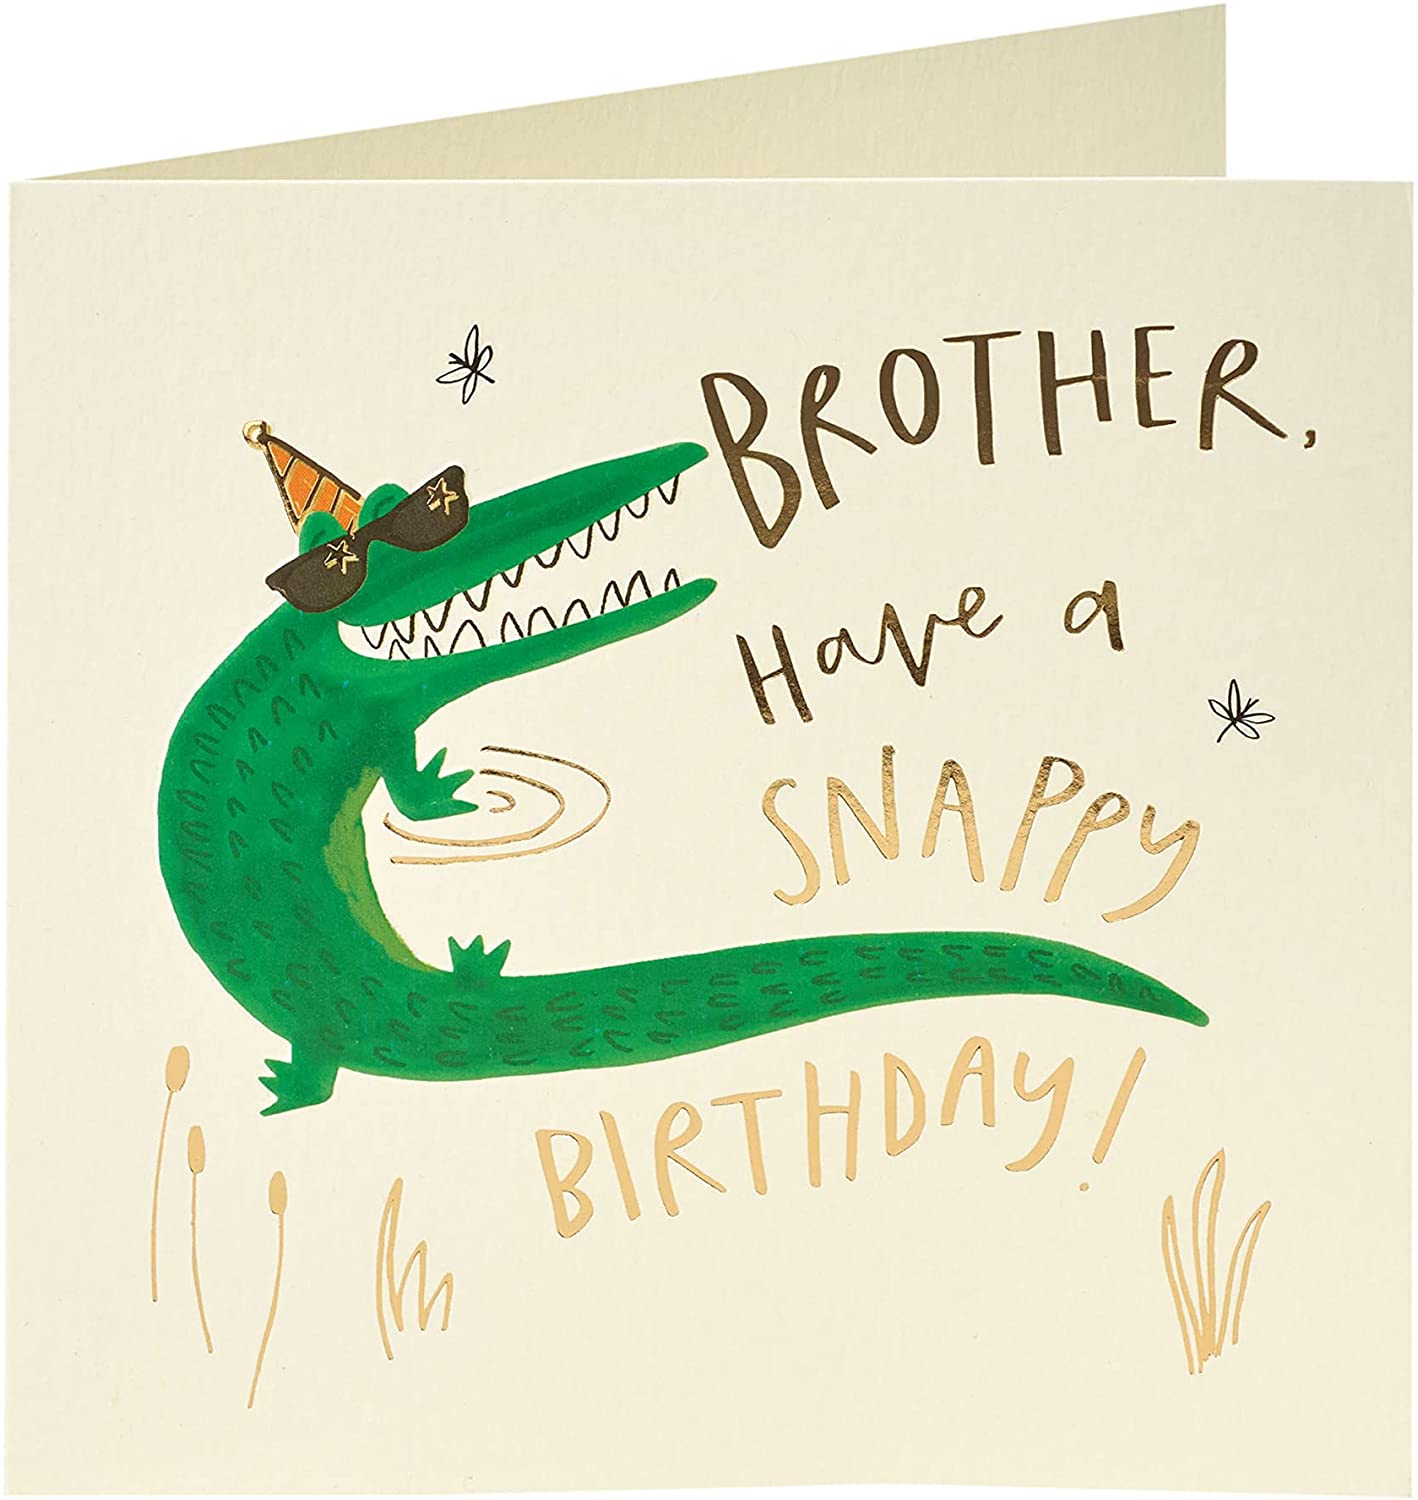 Funny Crococile with Pun Brother Birthday Card